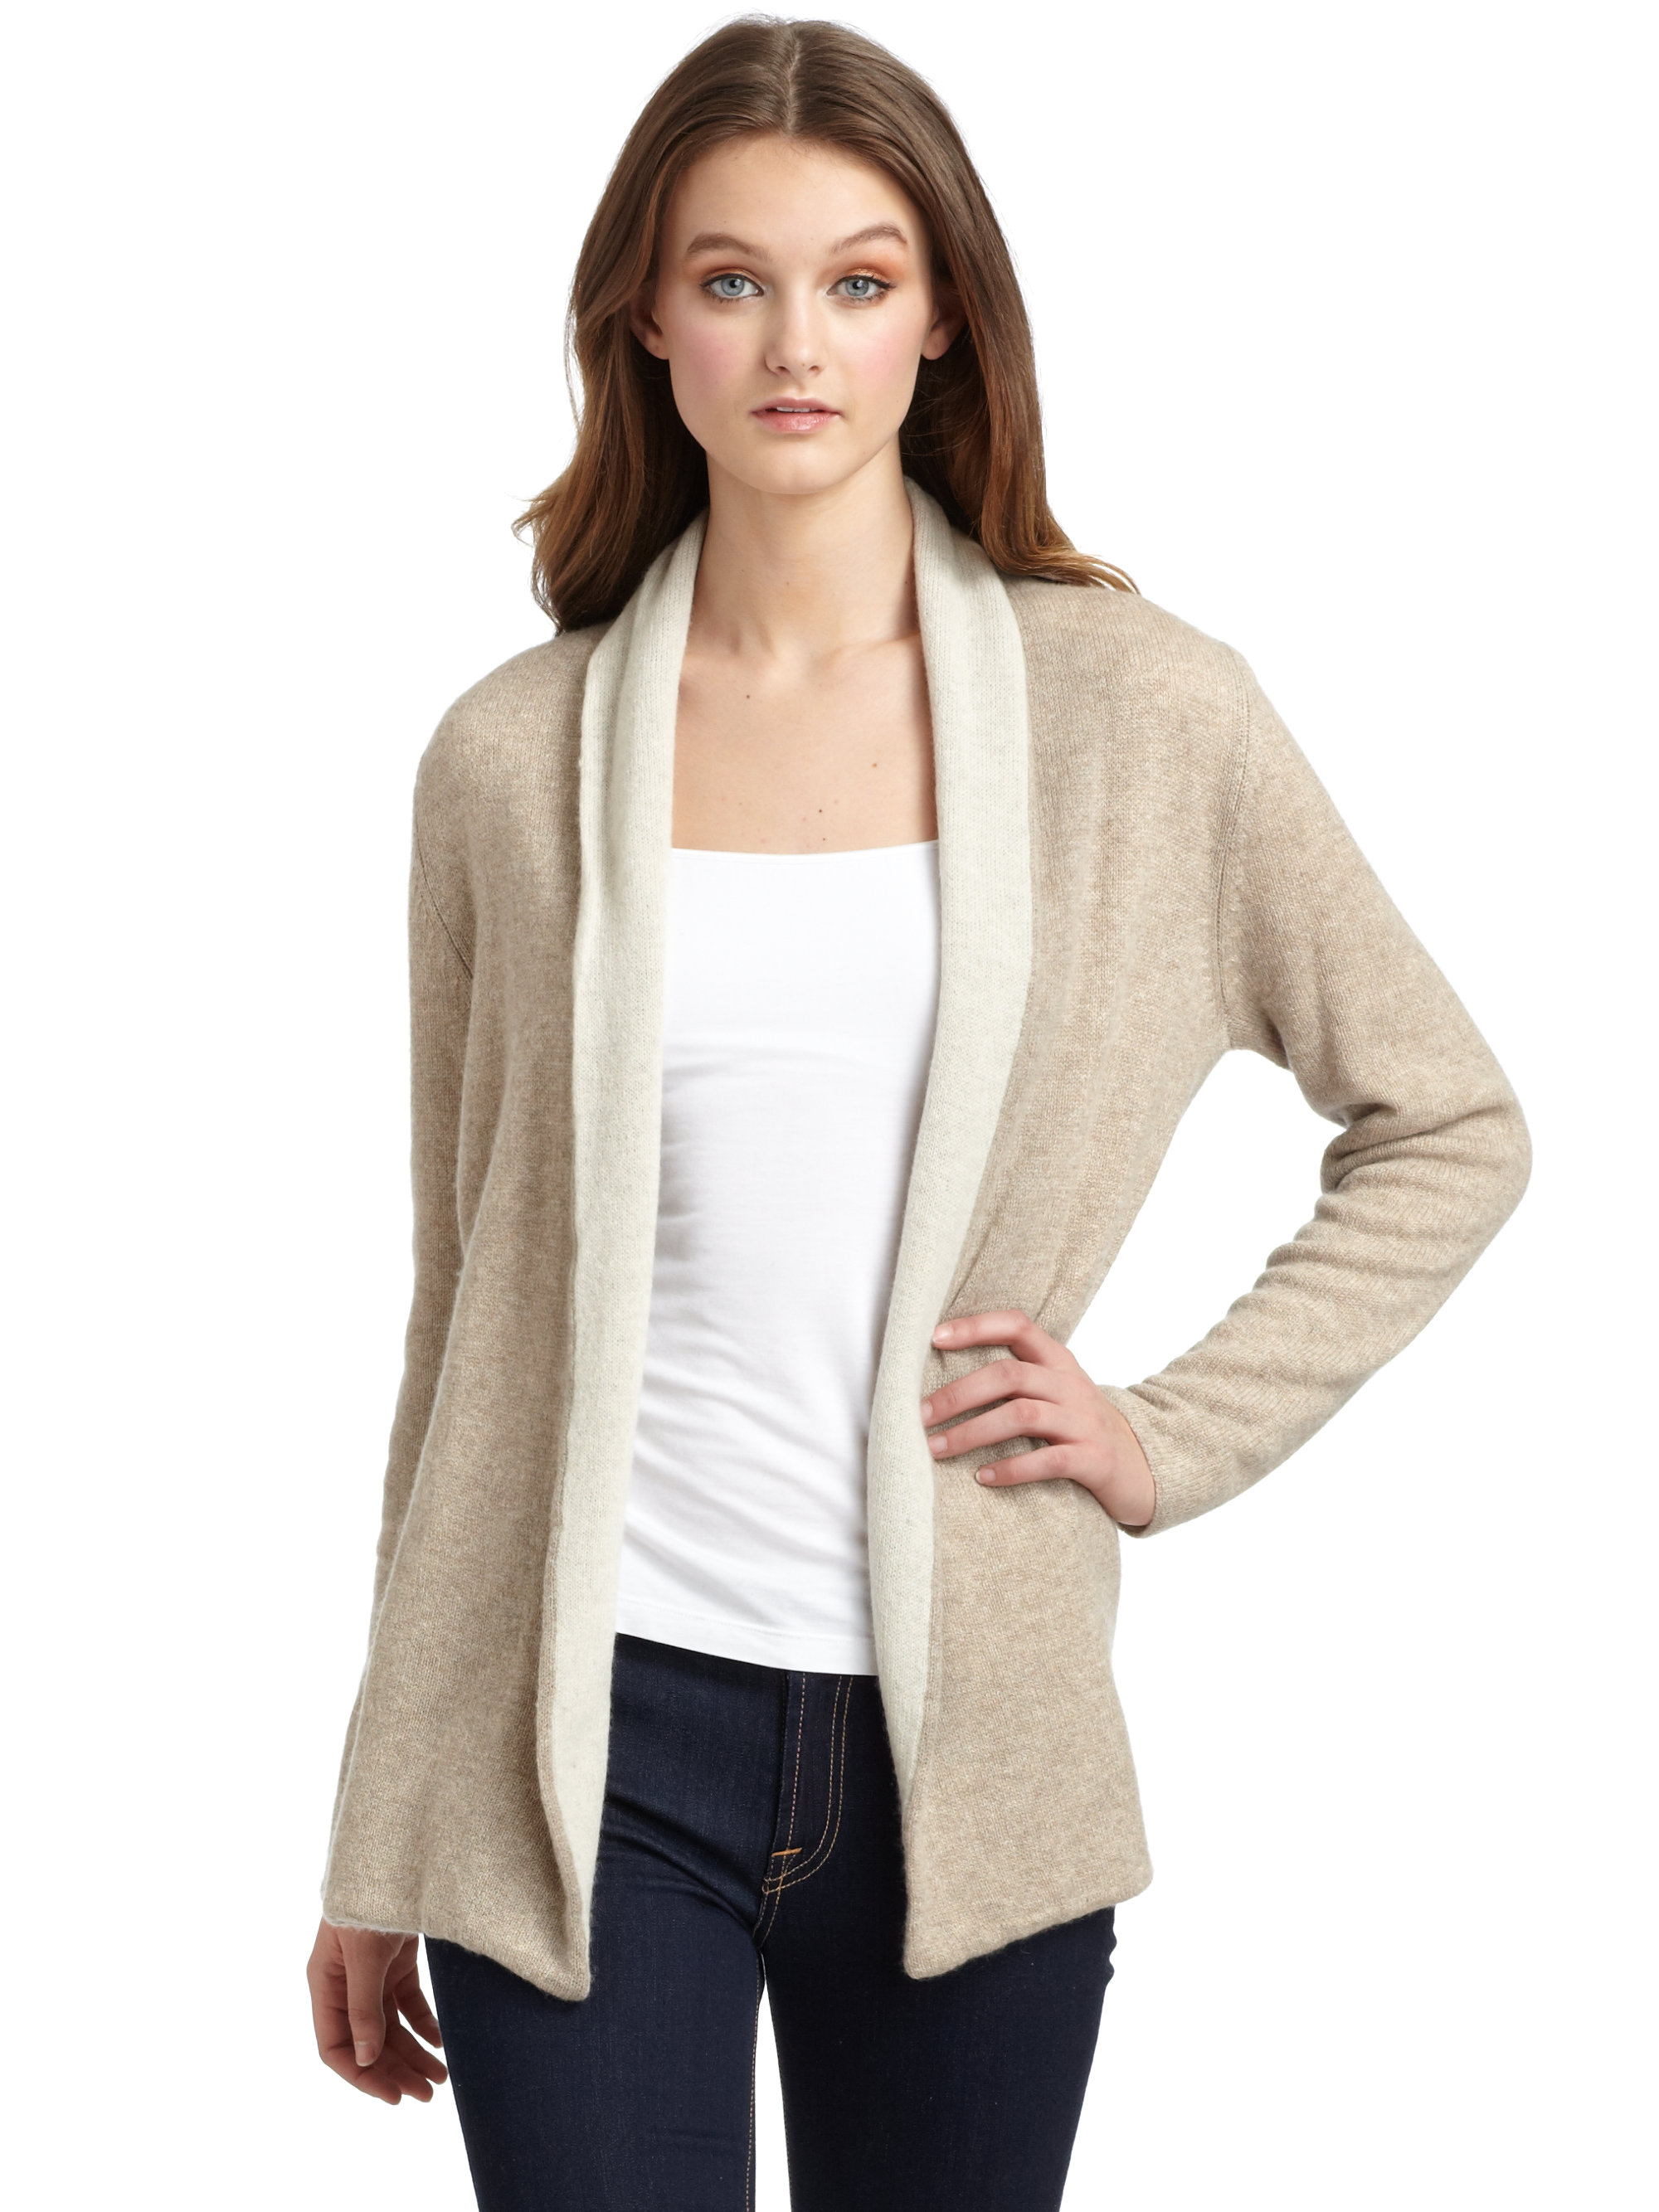 Lyst - Kokun Reversible Open Cashmere Cardigan in Natural